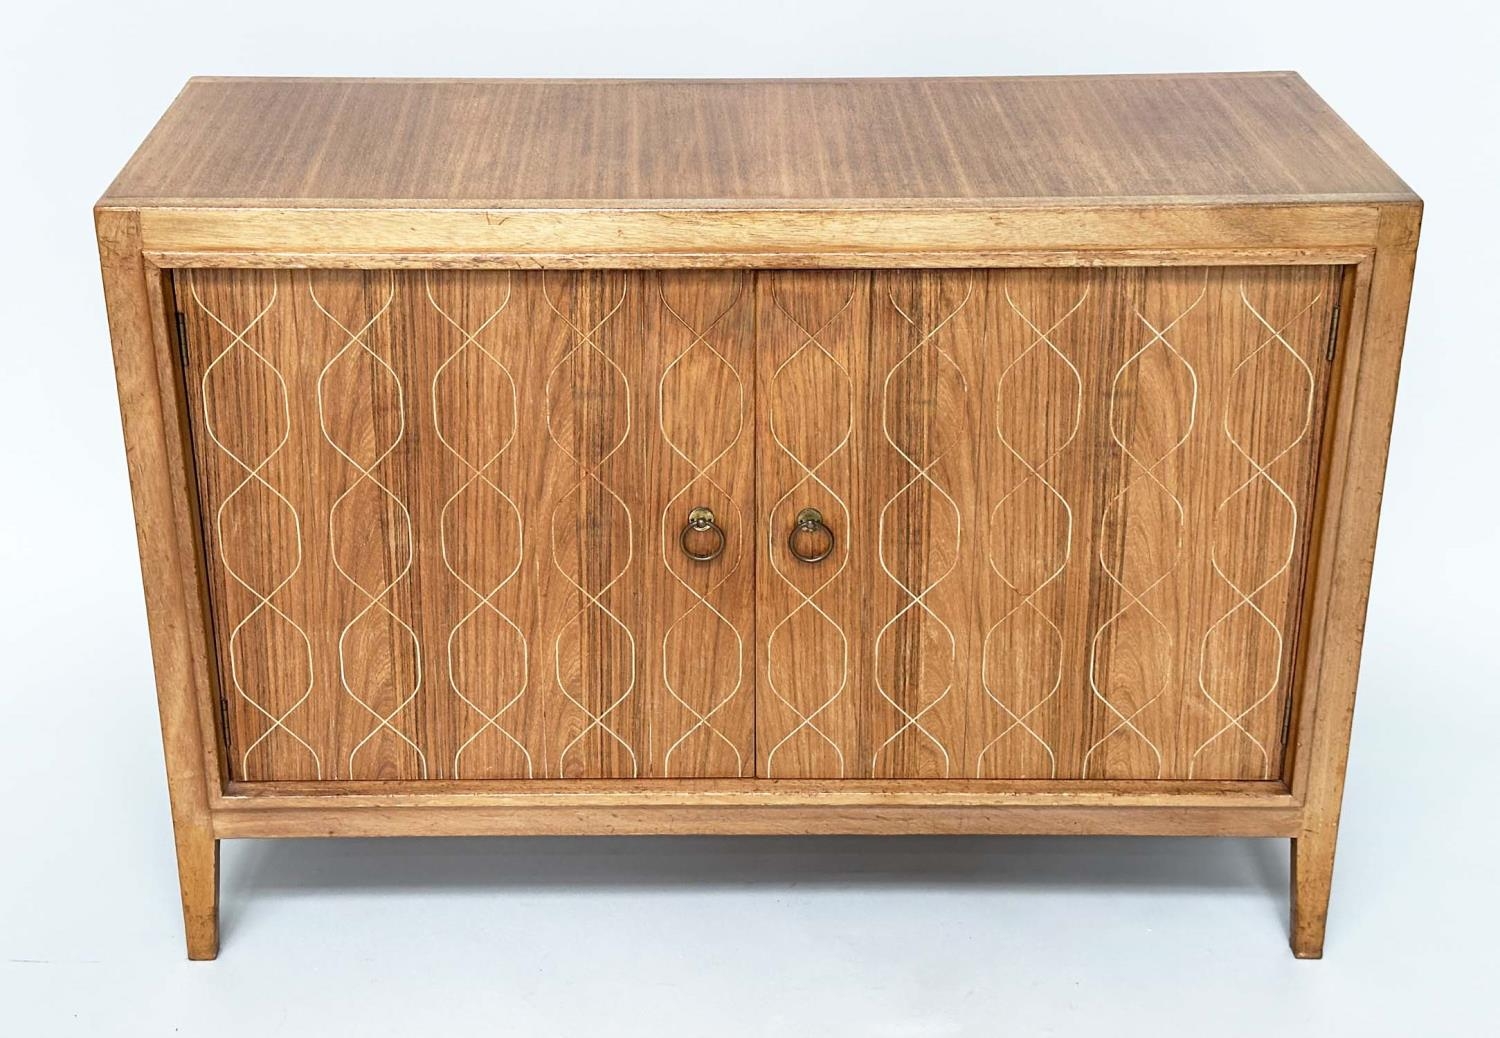 GORDON RUSSELL HELIX SIDEBOARD, walnut with two double helix incised panel doors, 120cm x 46cm x